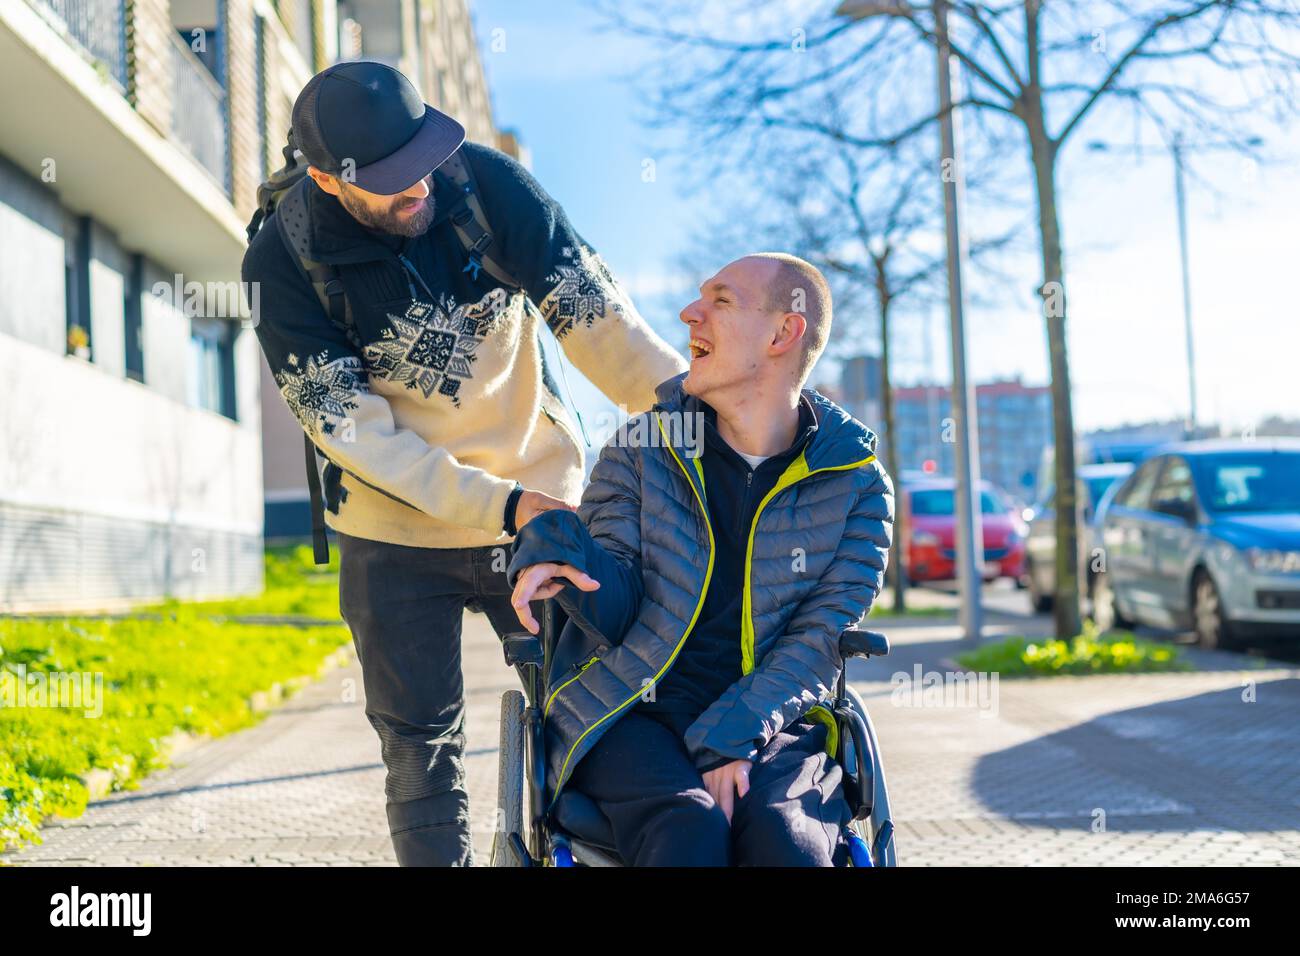 A disabled person in a wheelchair with a friend smiling, handicapped normality Stock Photo